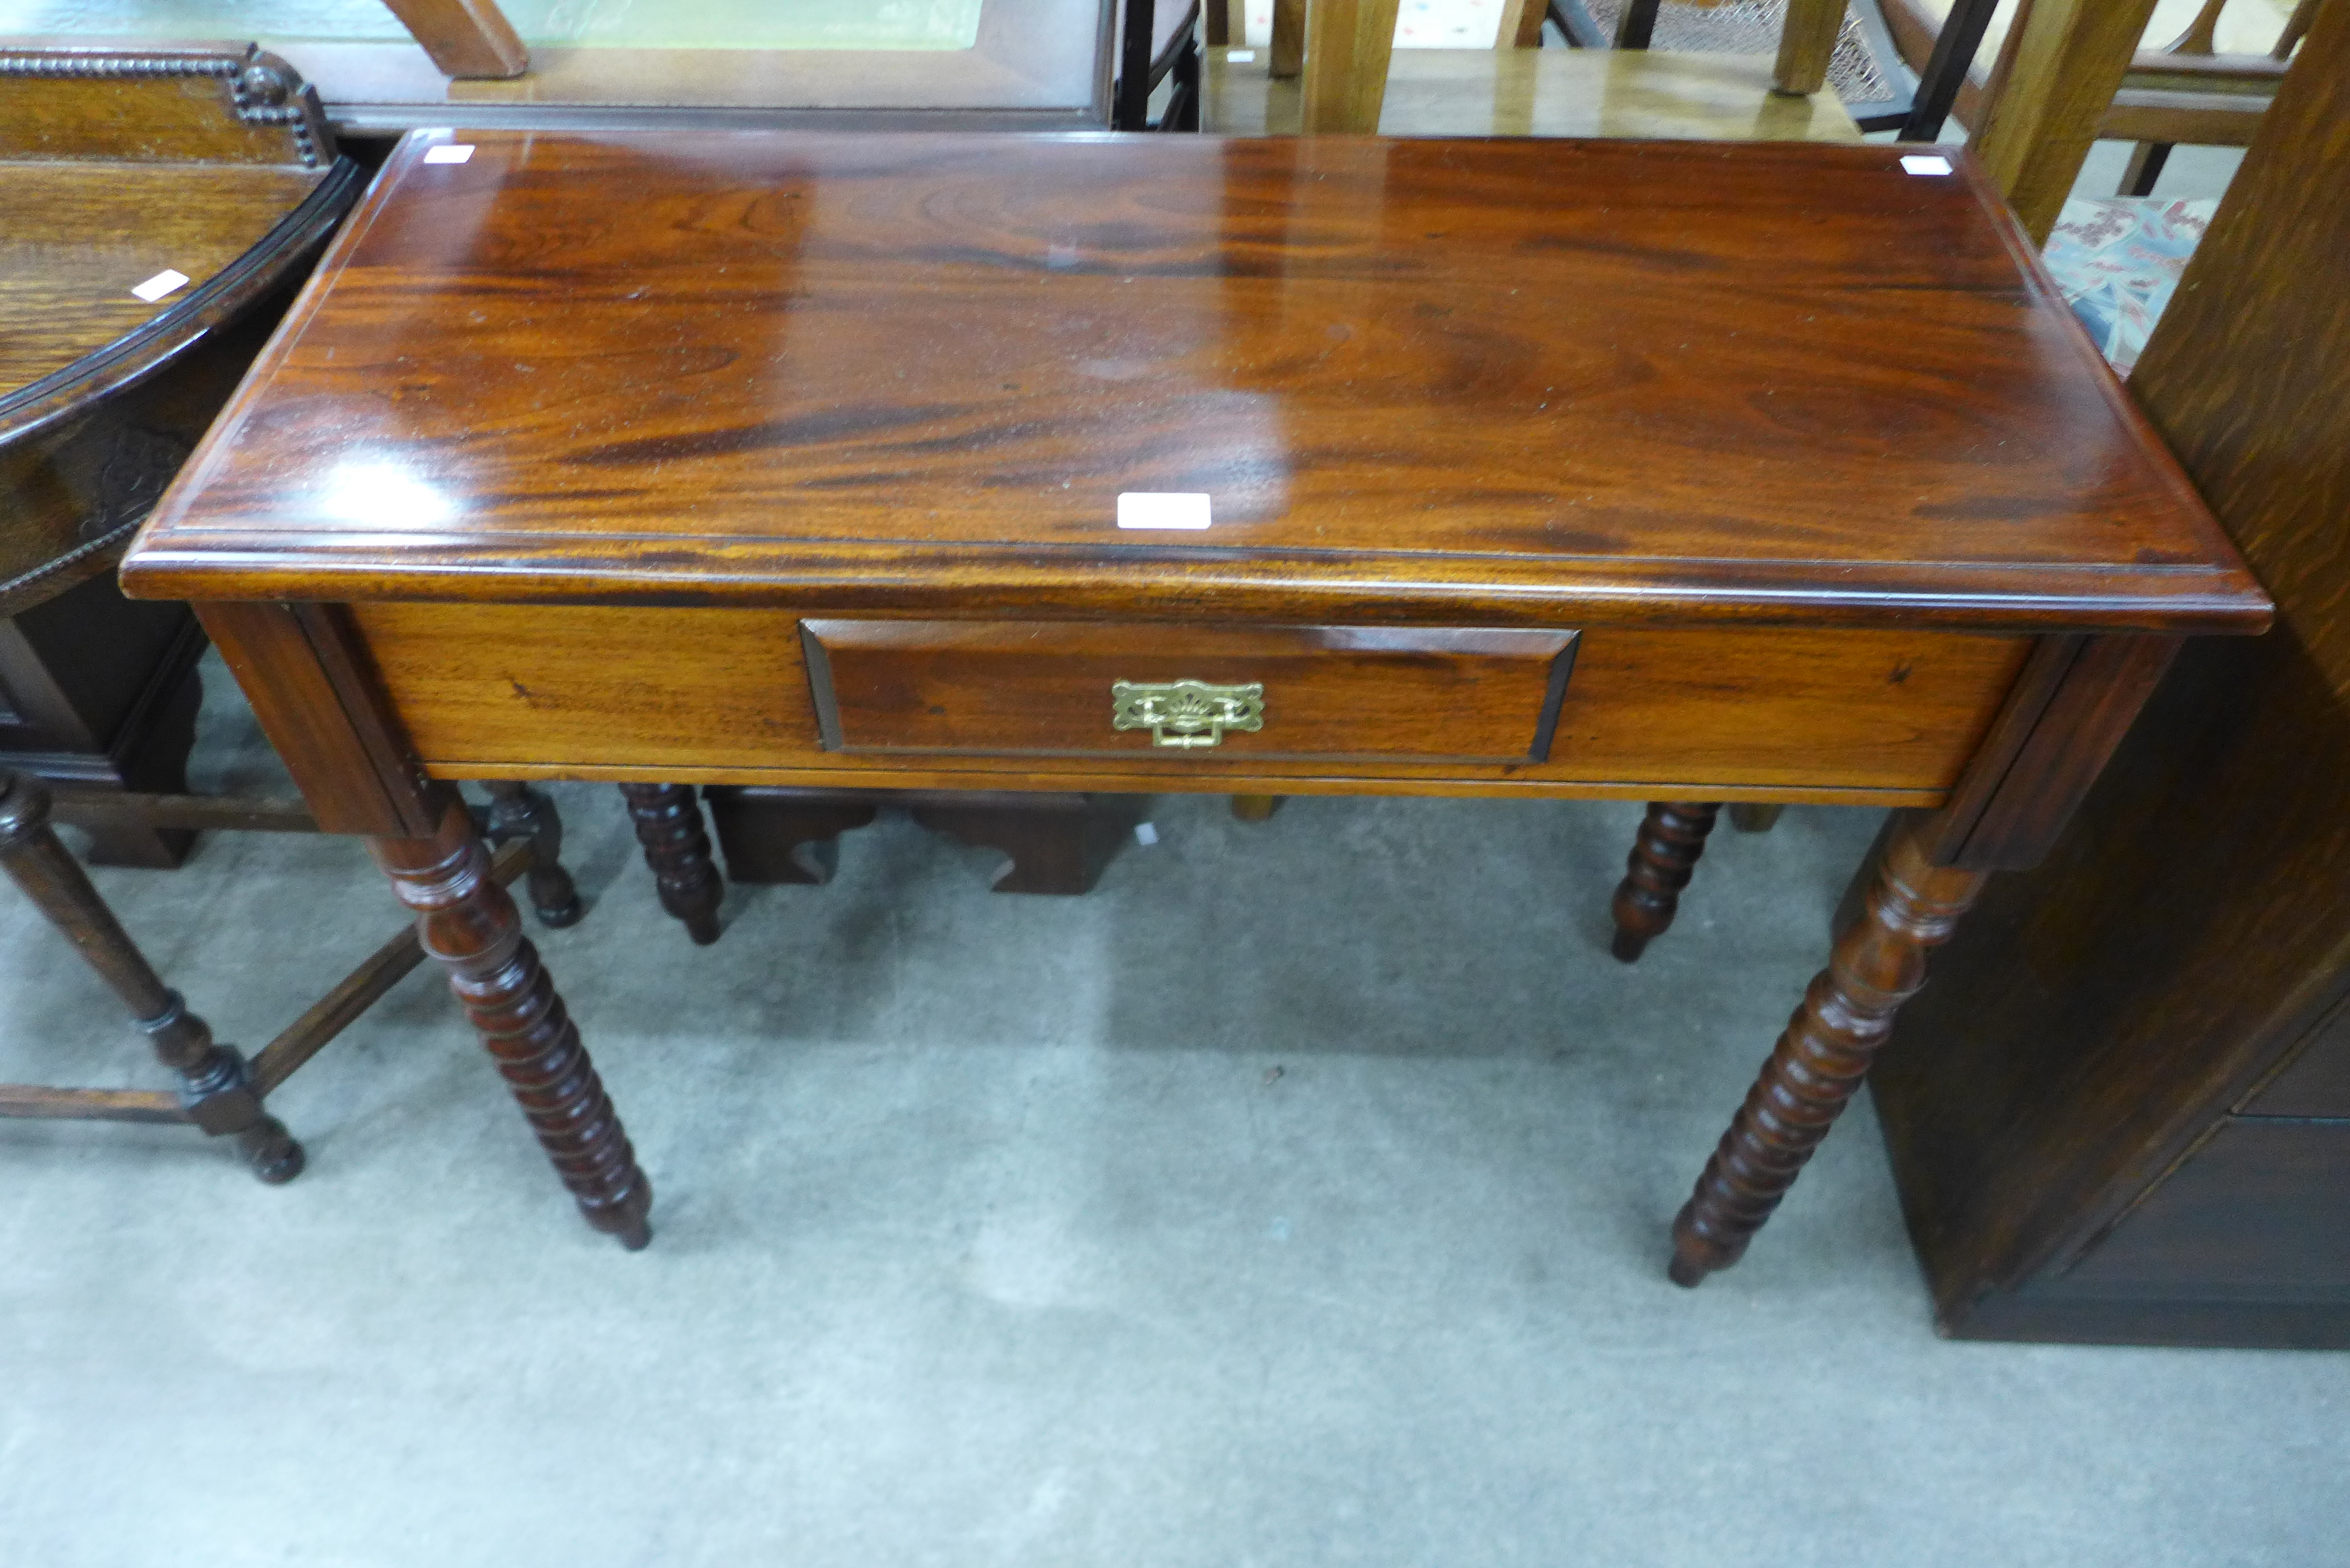 A Victorian style mahogany single drawer side table